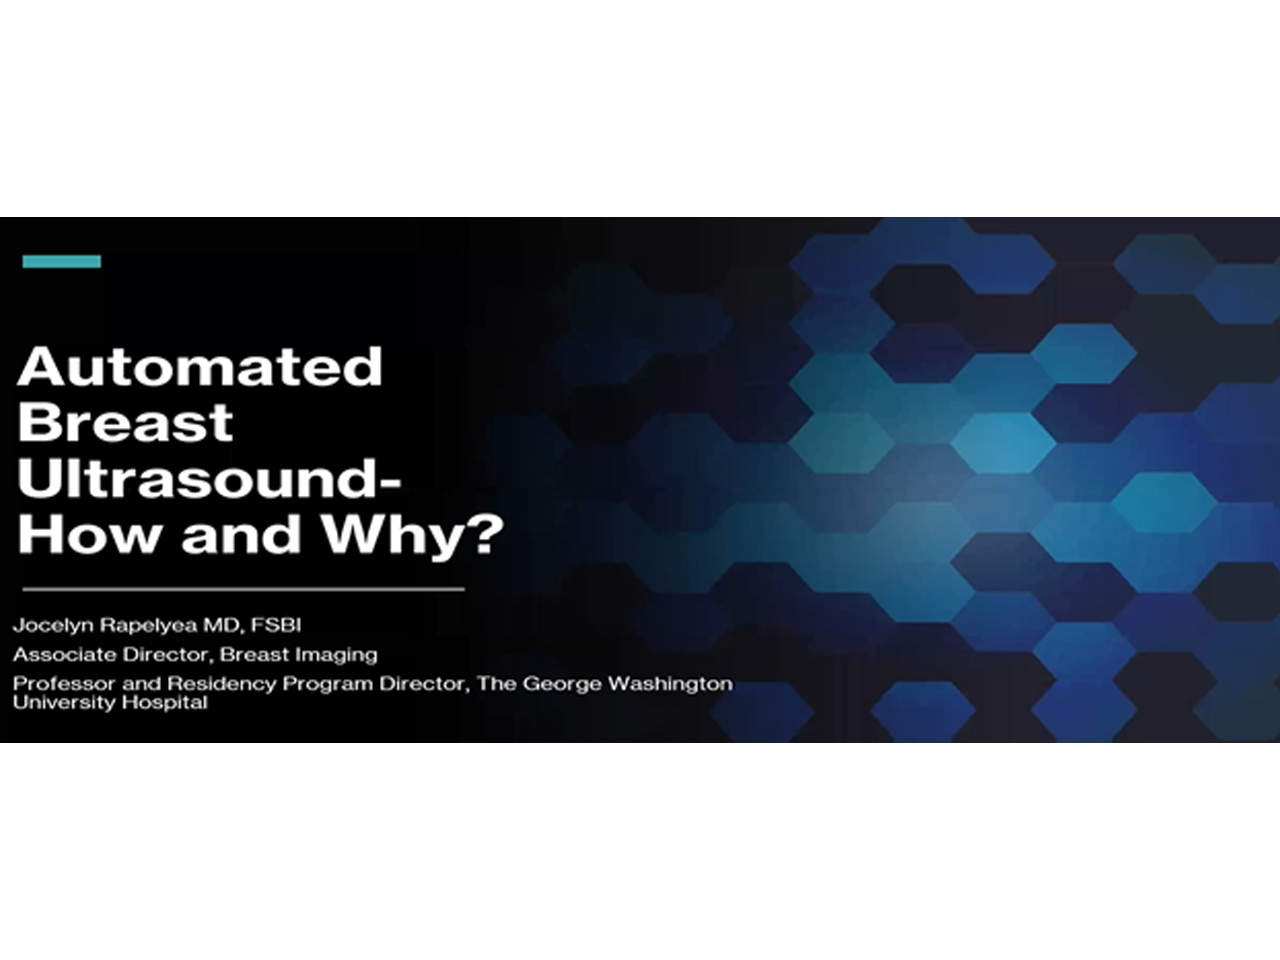 Automated Breast Ultrasound; How and Why? Webinar